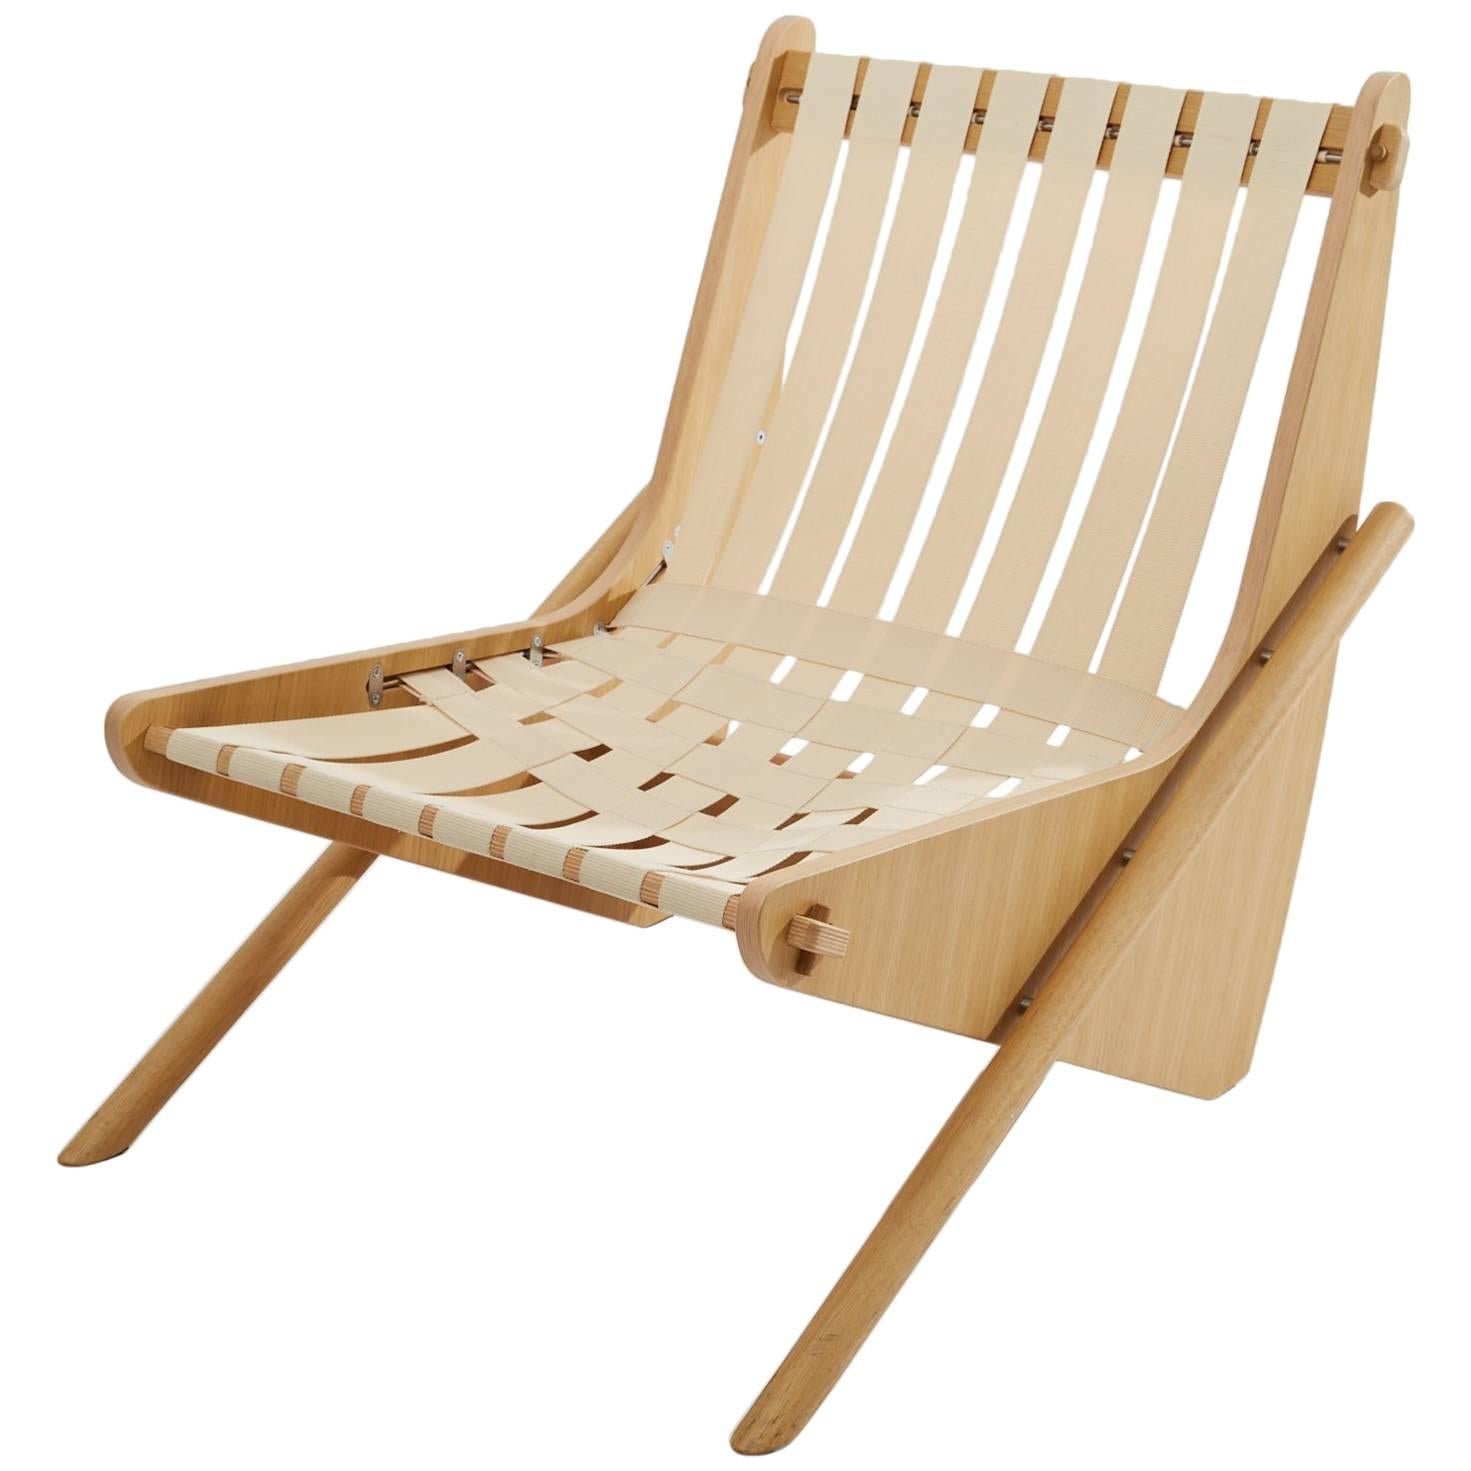 Richard Neutra Boomerang Lounge Chair in Natural Wood and Yarn, 1942 For Sale